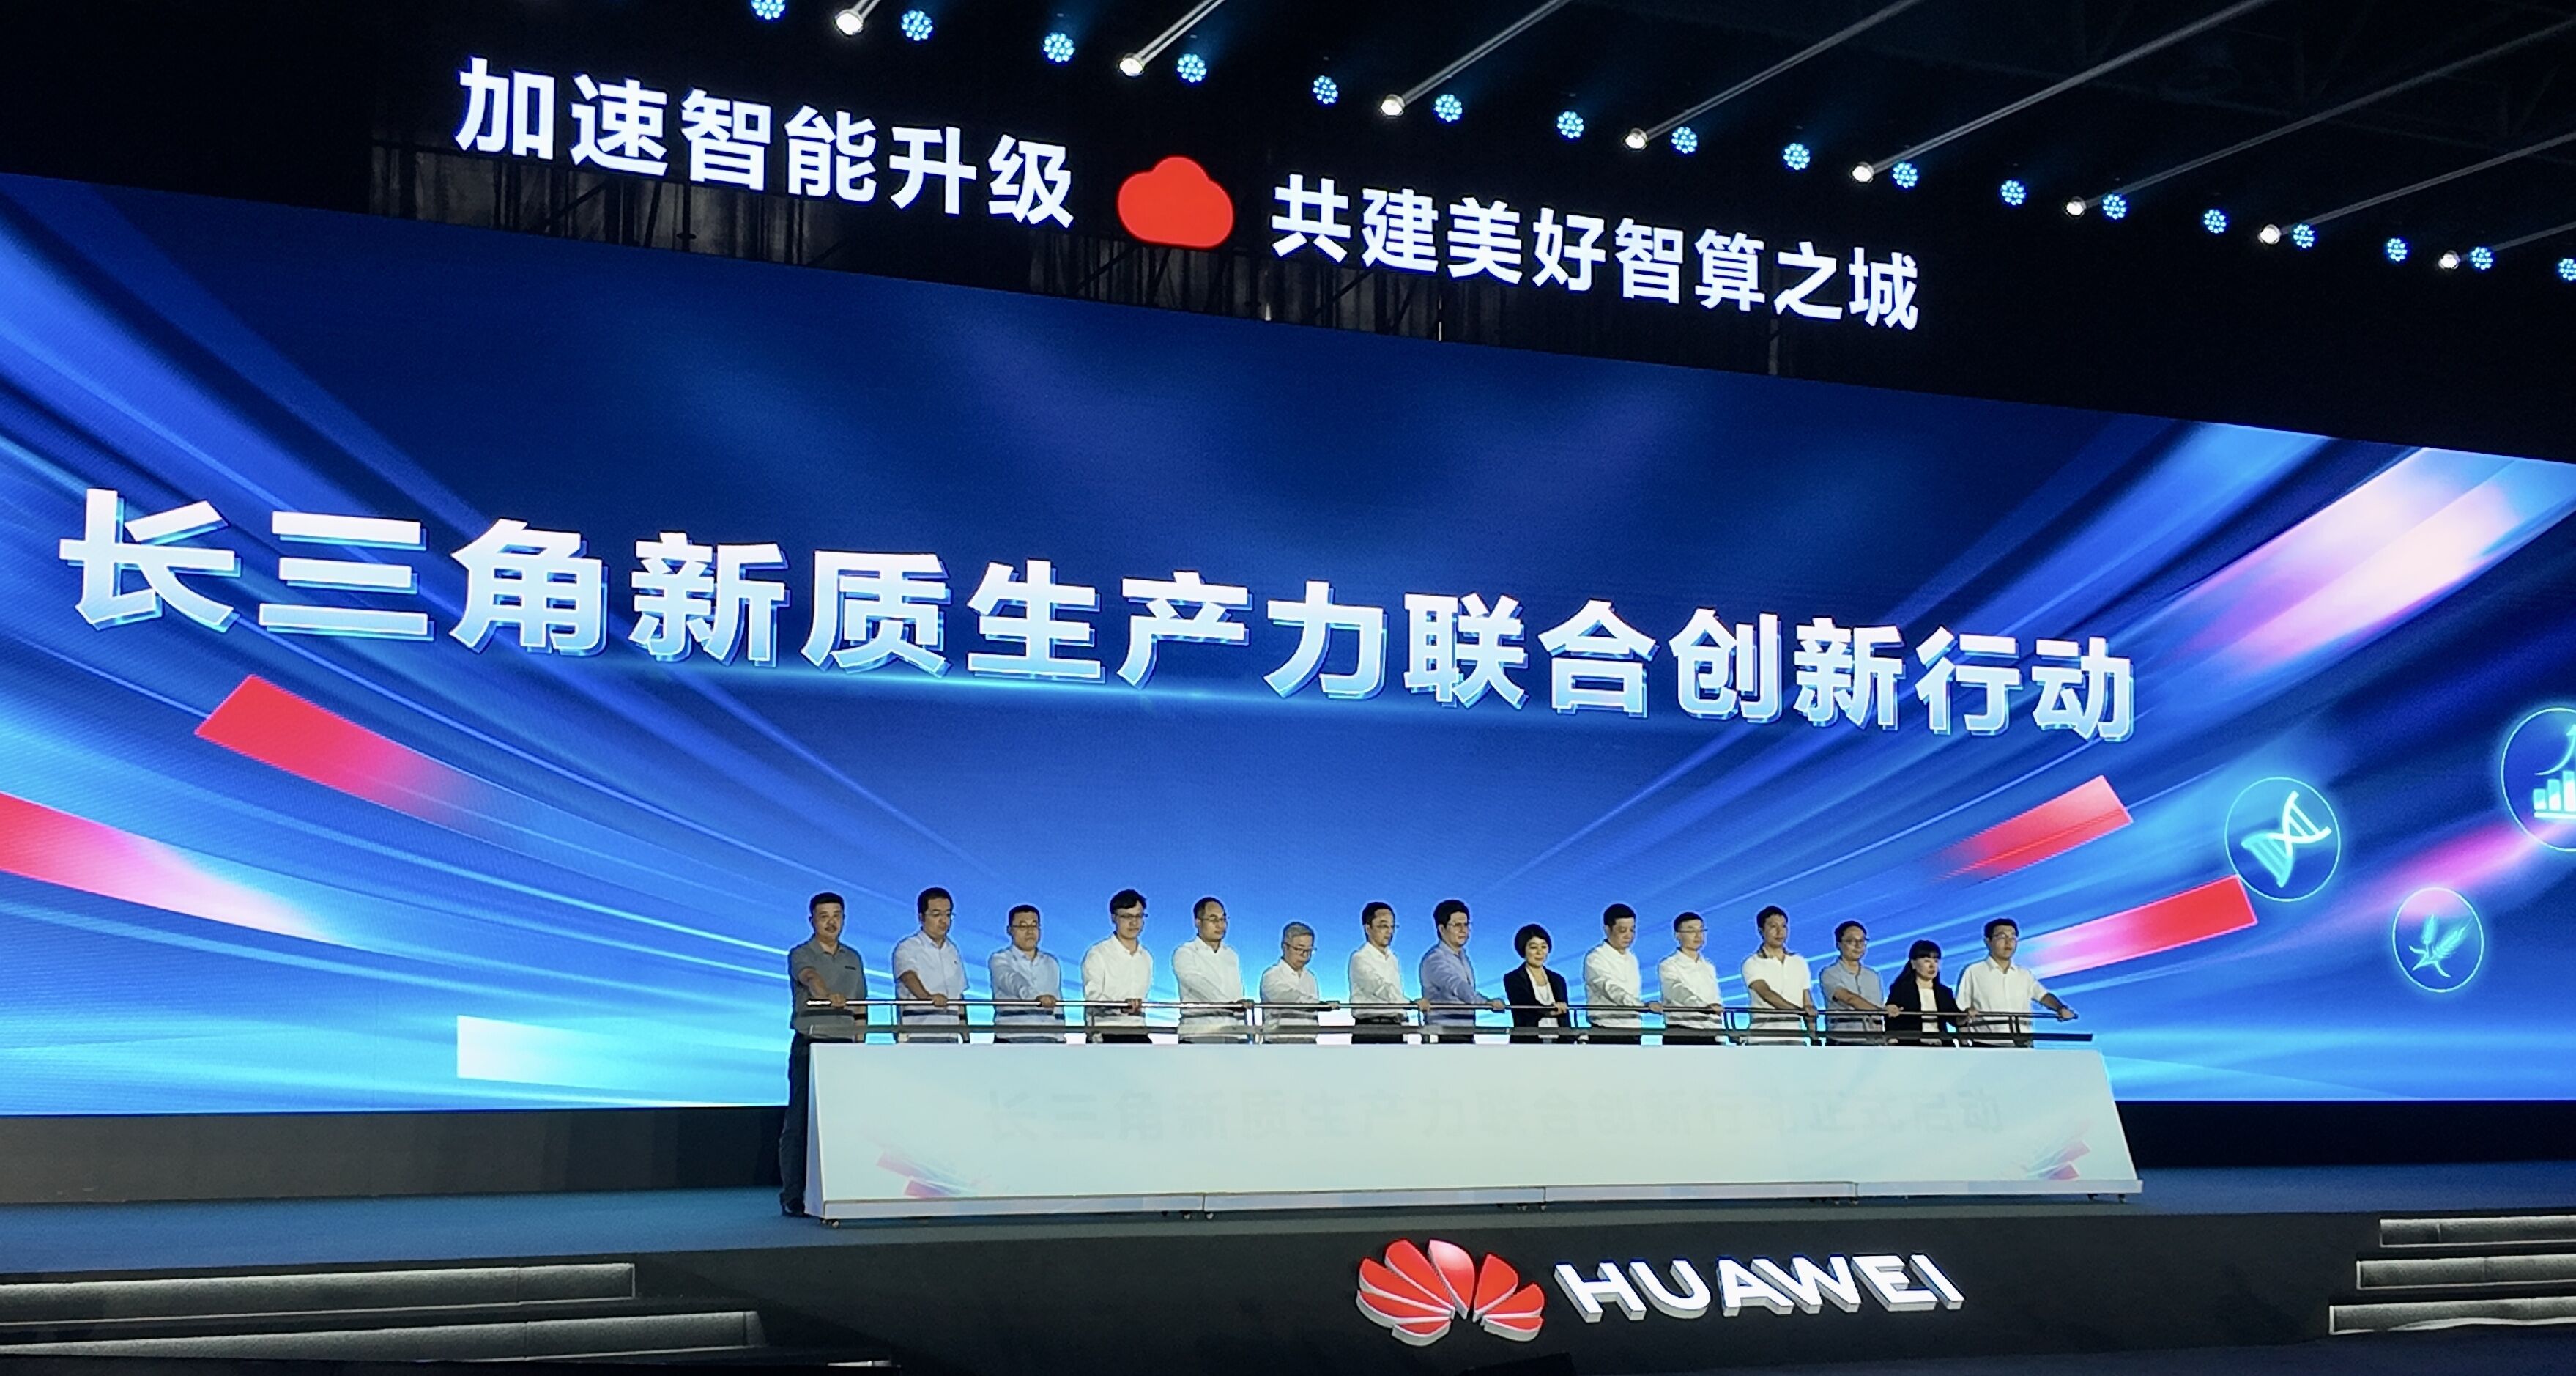  The joint innovation action of new quality productivity in the Yangtze River Delta was launched and initiated